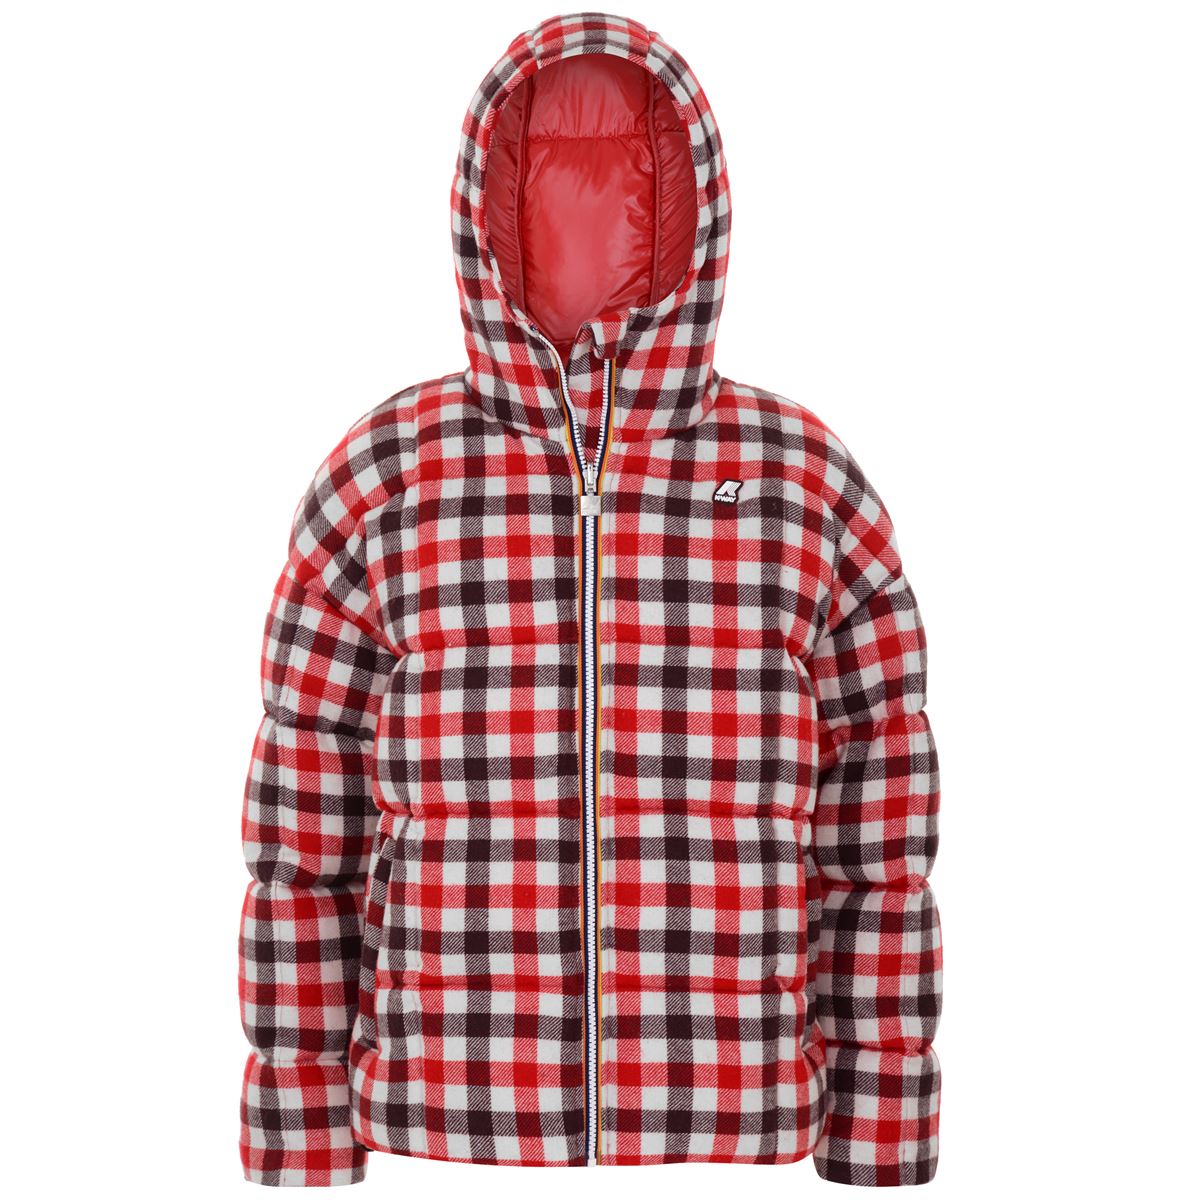 Women's checked jacket